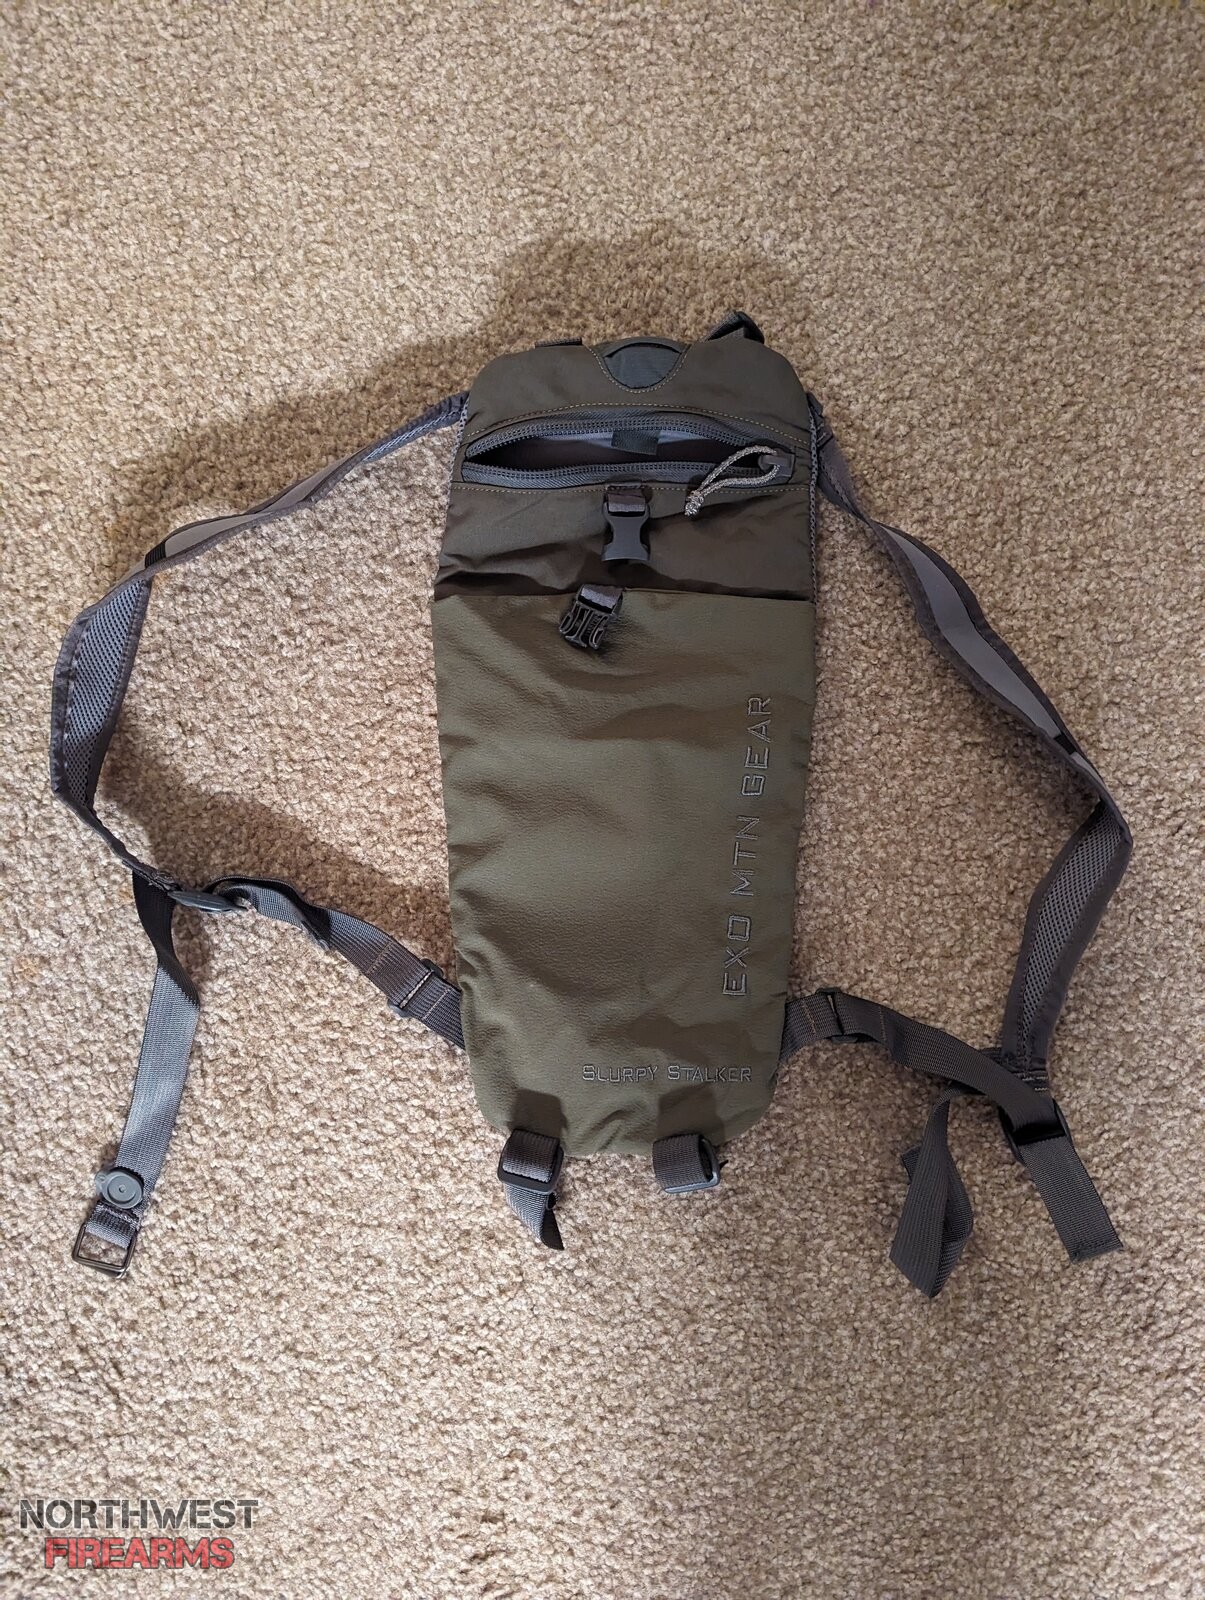 Exo Mtn Gear K3 4800 Pack in Ranger Green with Extras! | Northwest Firearms